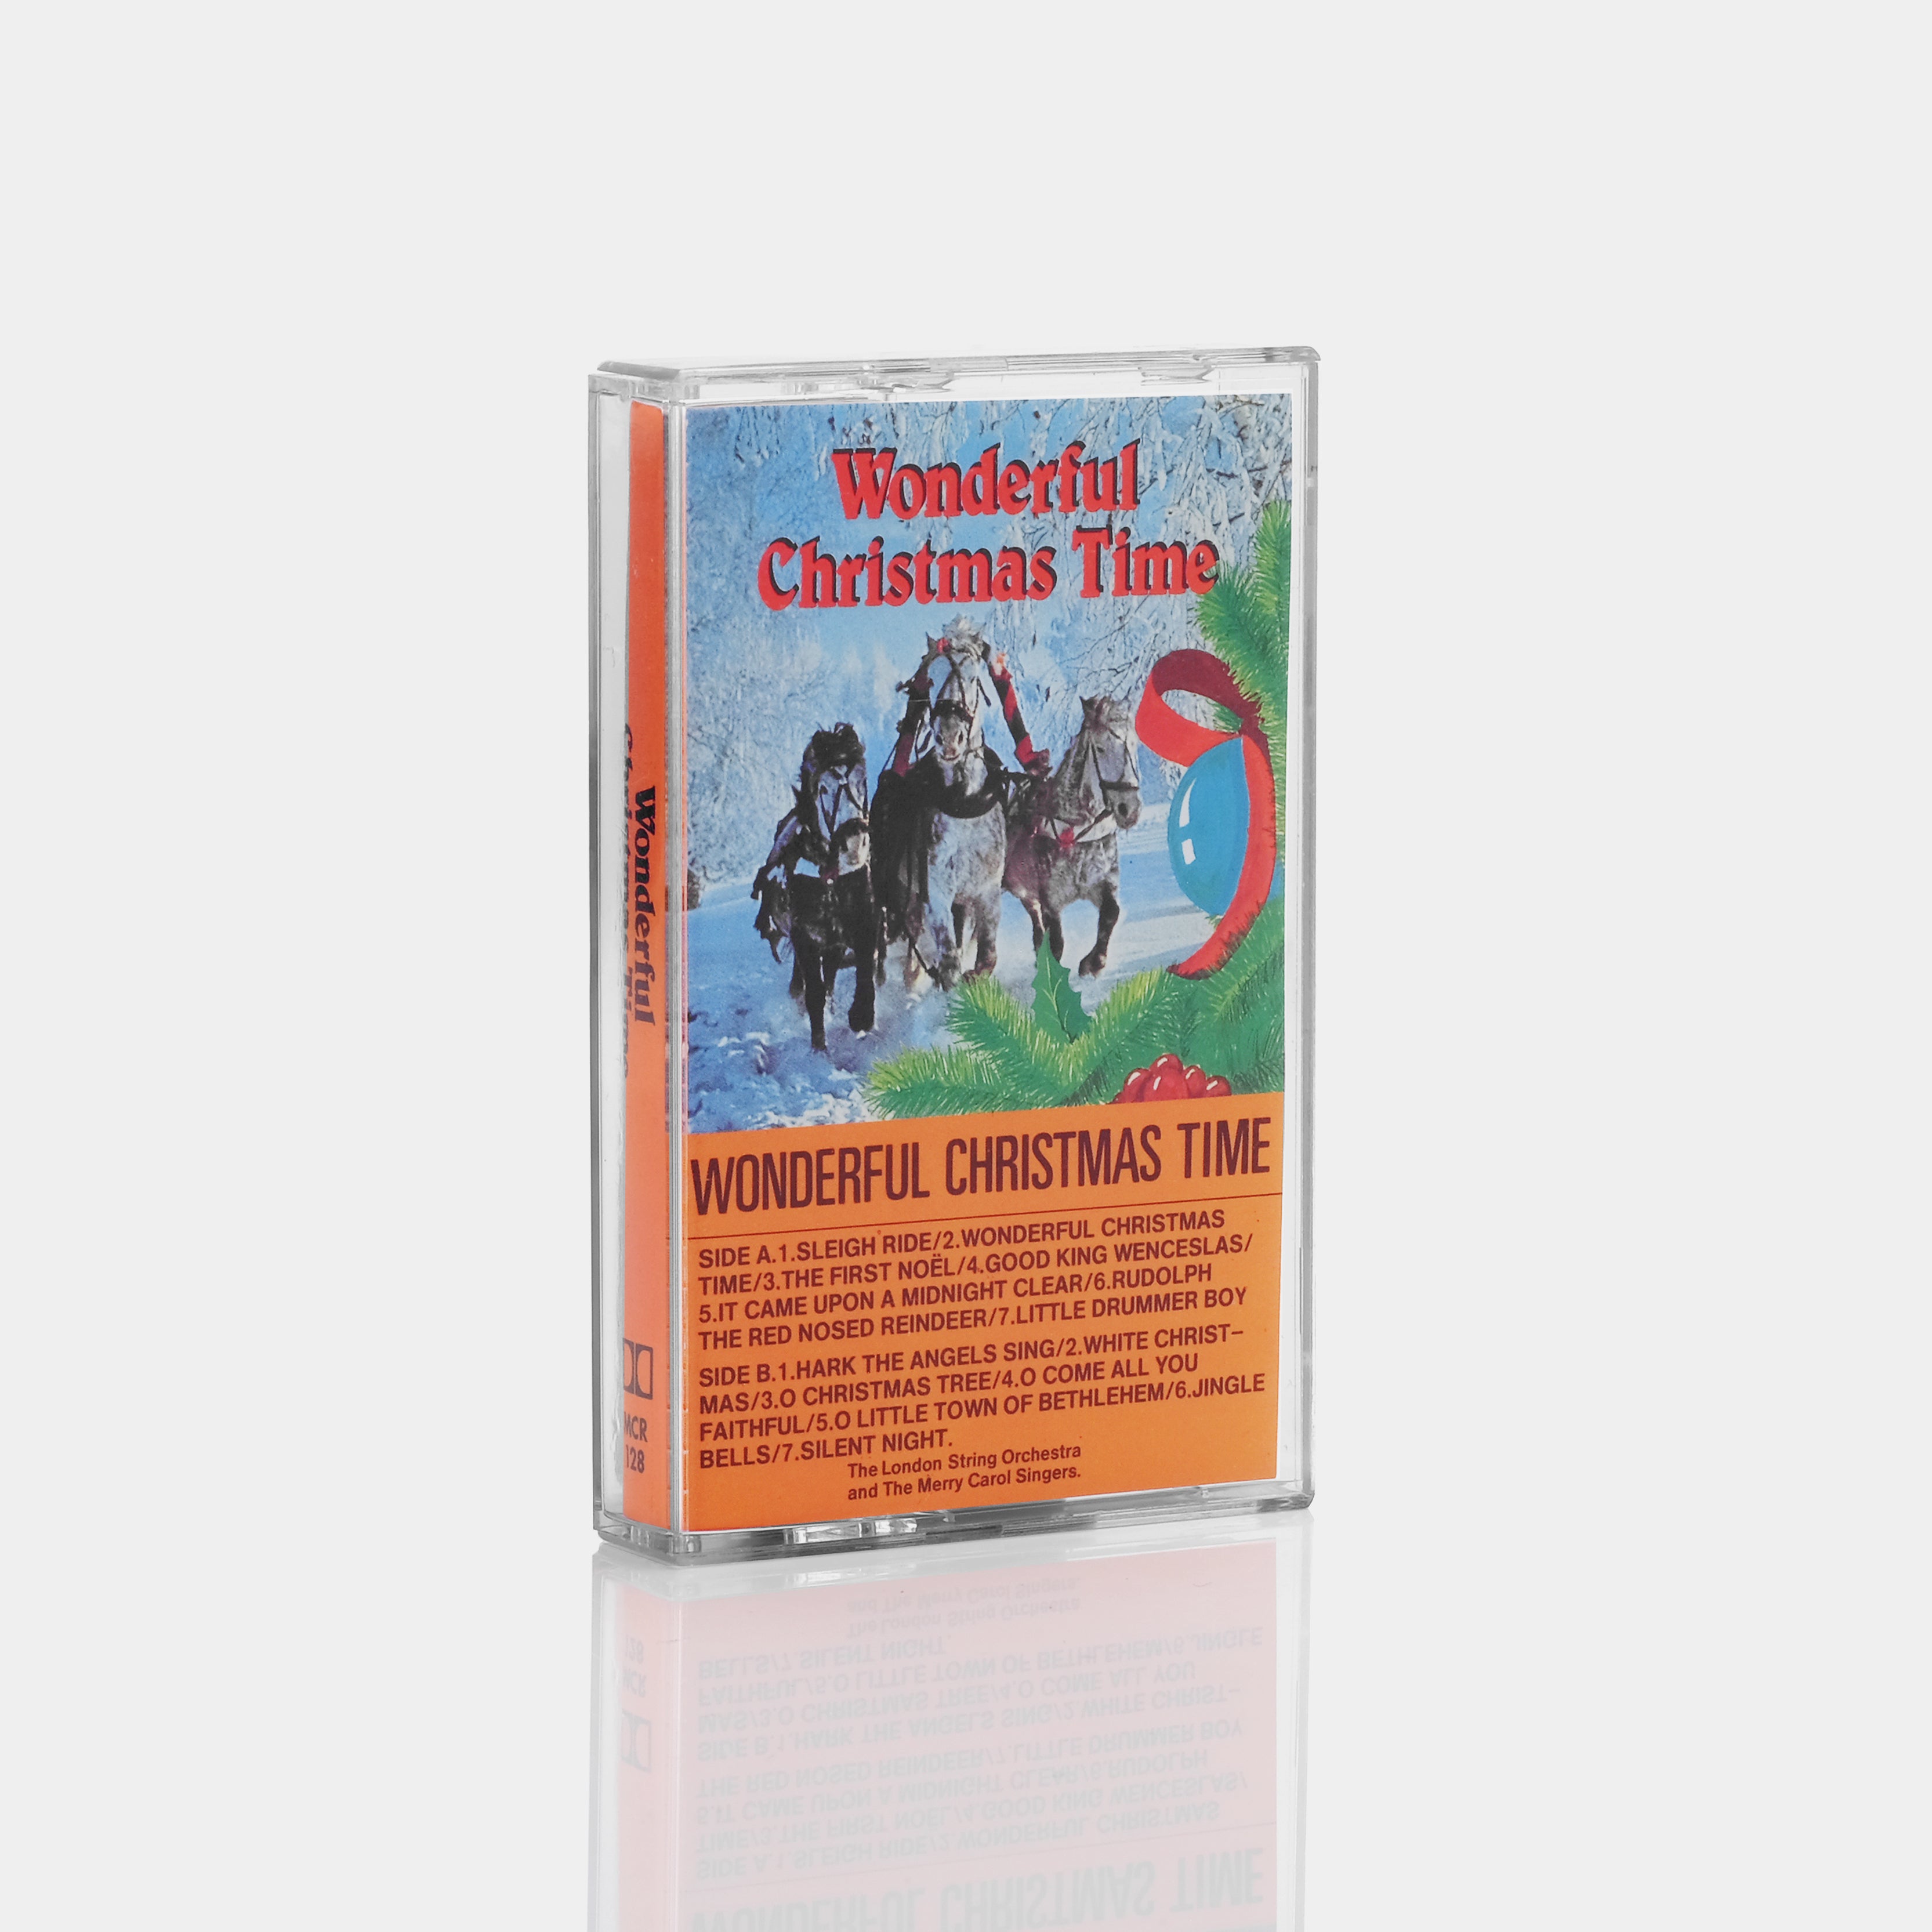 The London String Orchestra & The Merry Carol Singers - Wonderful Christmas Time Cassette Tape